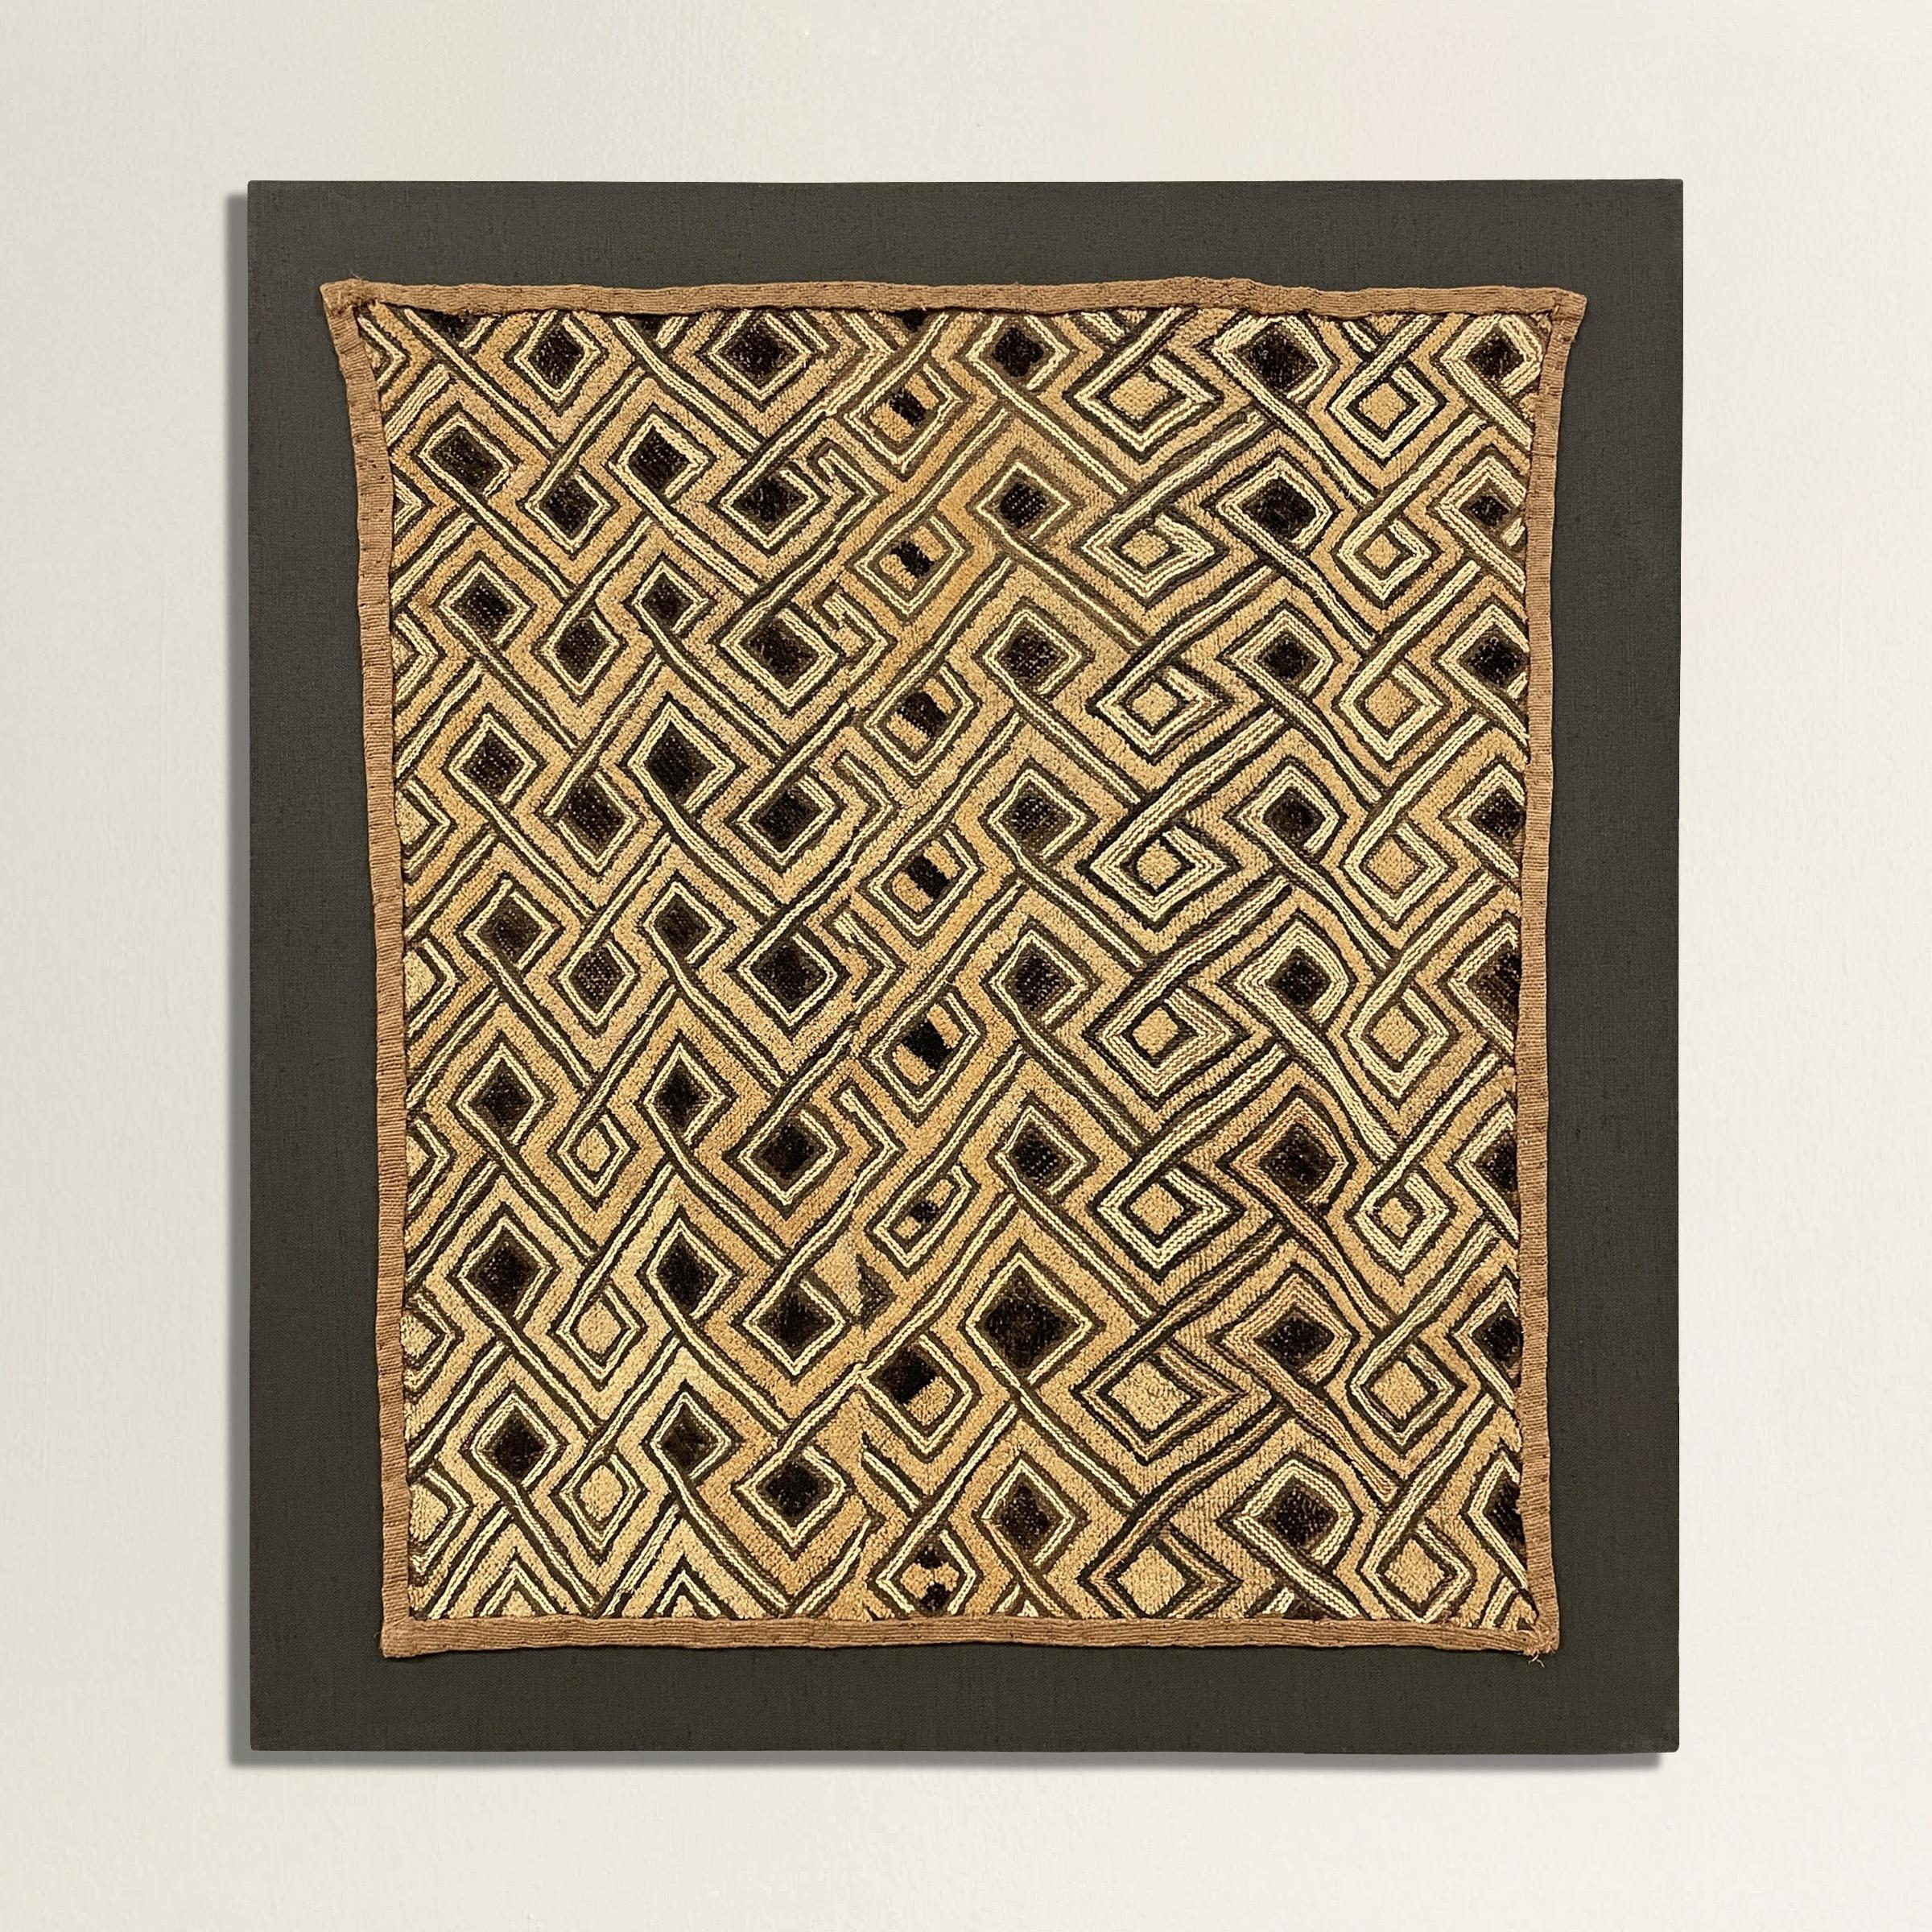 A striking 20th century Kuba cloth panel with a fantastic all-over interlocking meandering hook pattern woven in black and natural flat-weave and cut pile raffia. Kuba cloths are constructed of fine strips of raffia, knotted and cut, creating